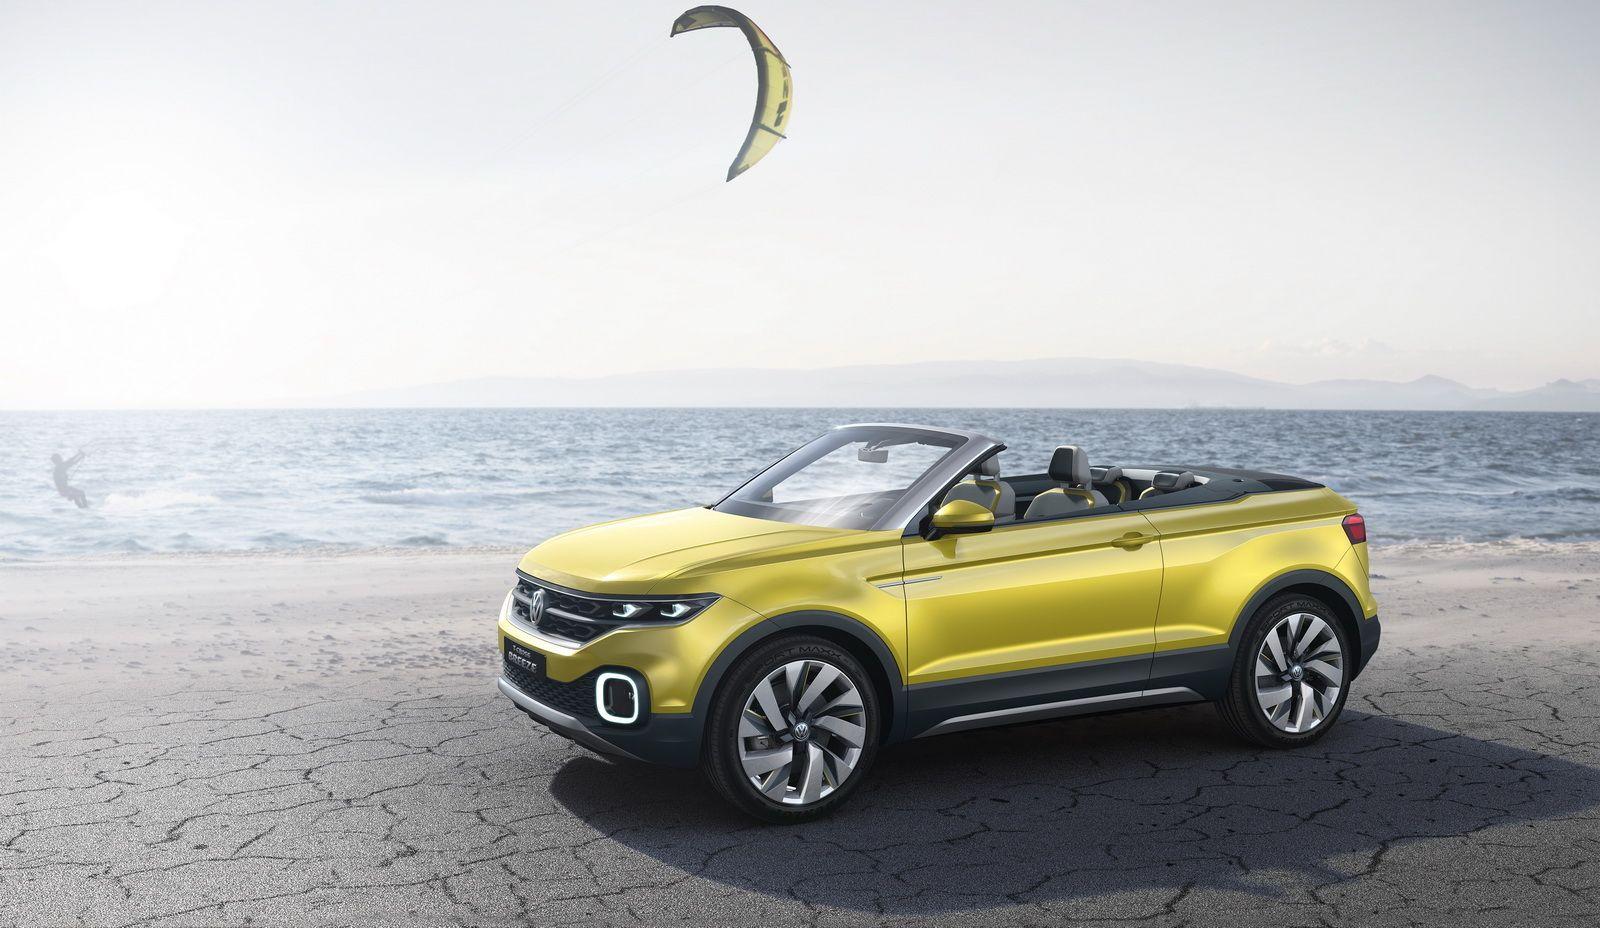 VW T Cross Small SUV Coming This Year, Could Debut At The Paris Auto